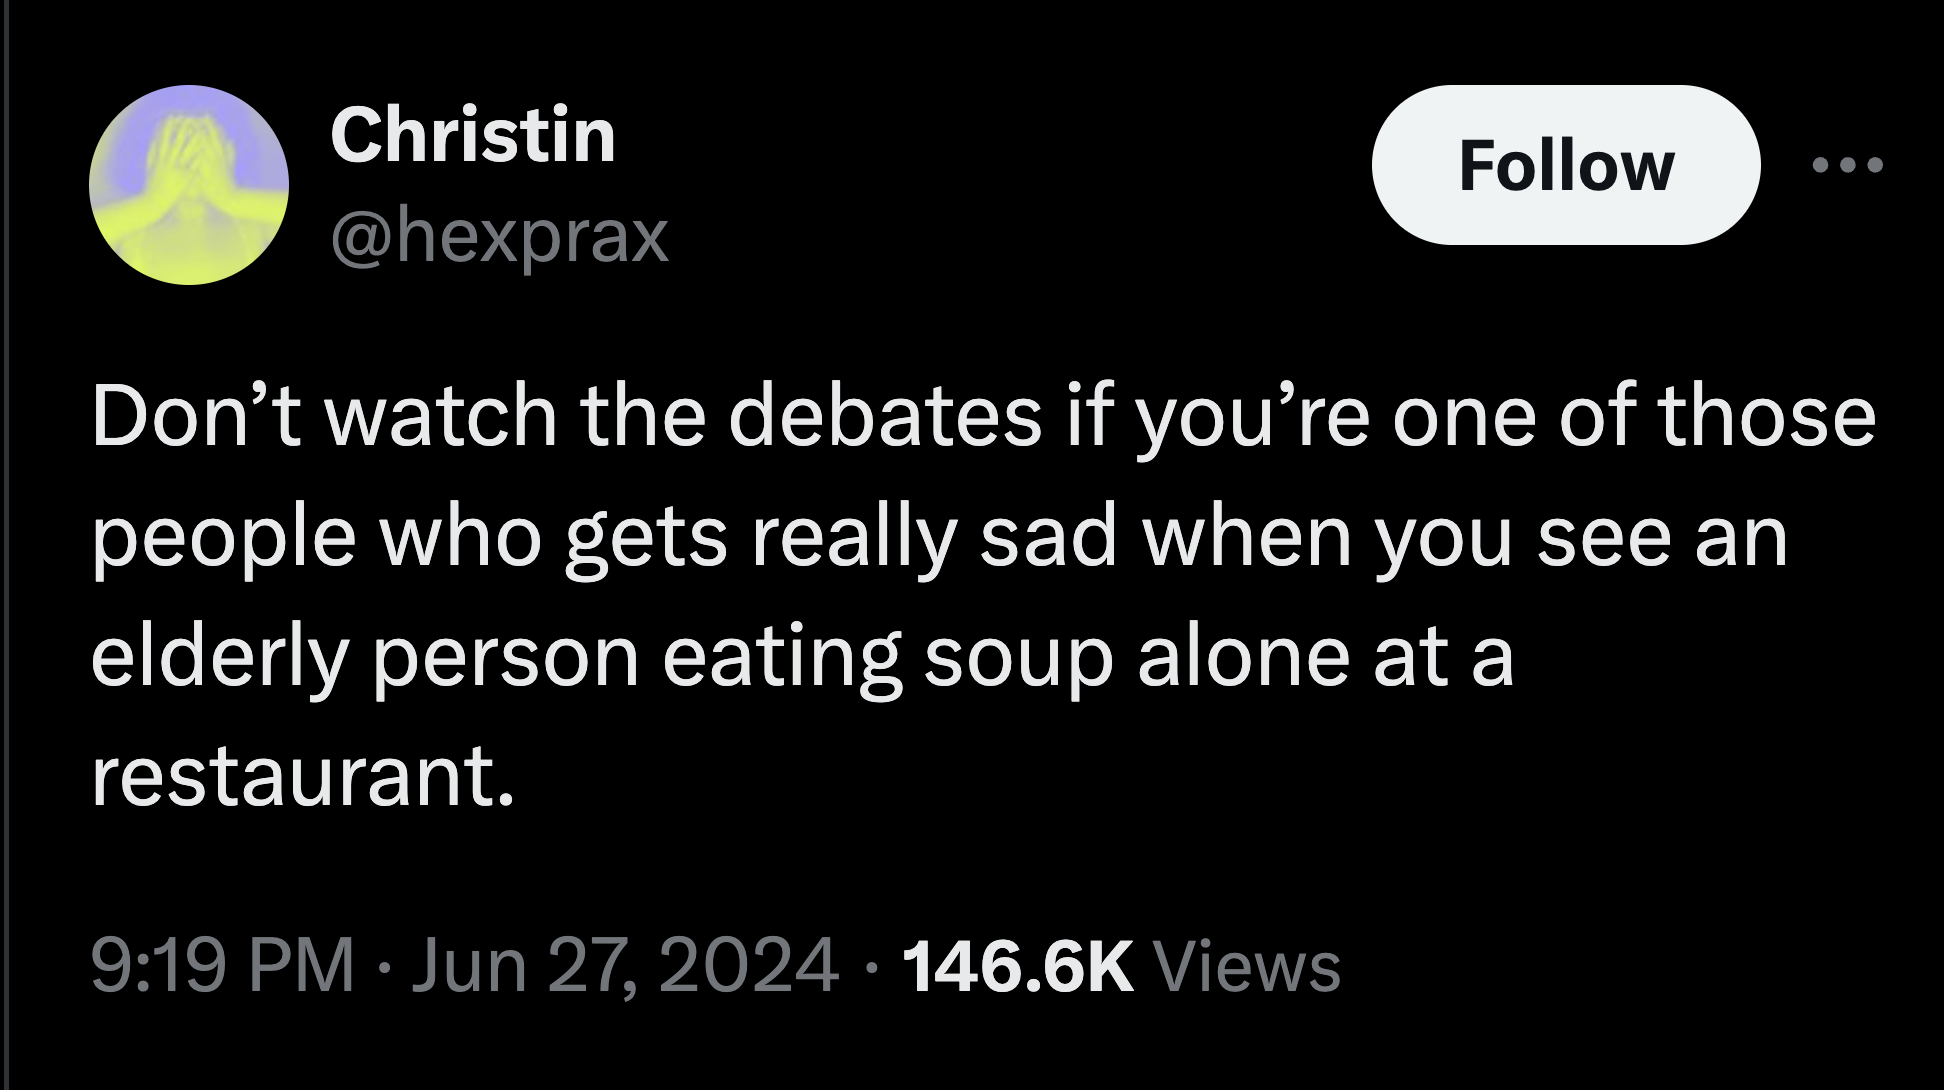 screenshot - Christin Don't watch the debates if you're one of those people who gets really sad when you see an elderly person eating soup alone at a restaurant. Views